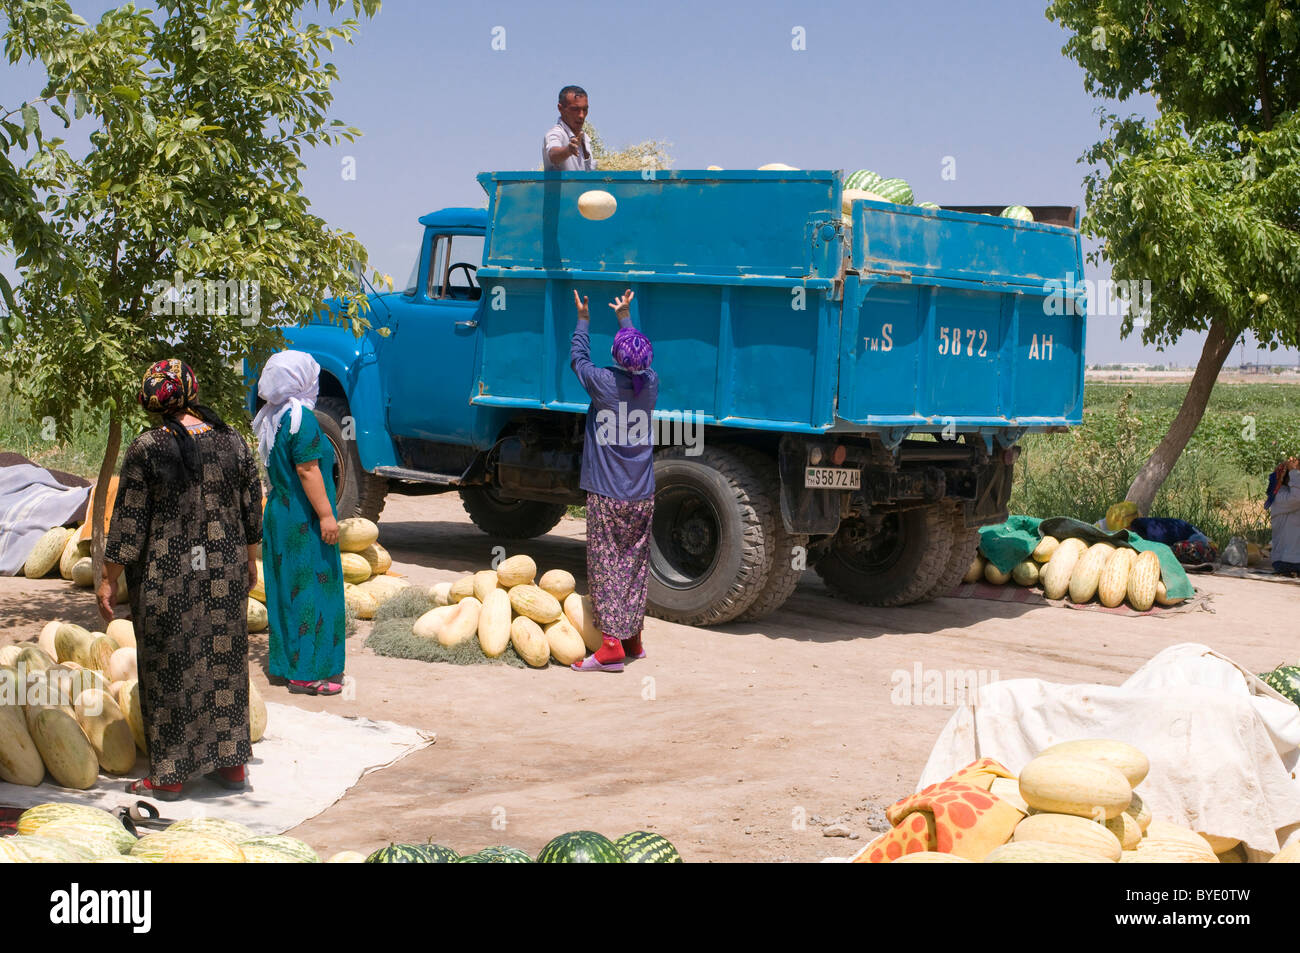 People transporting melons and other fruits, Turkmenistan, Central Asia Stock Photo